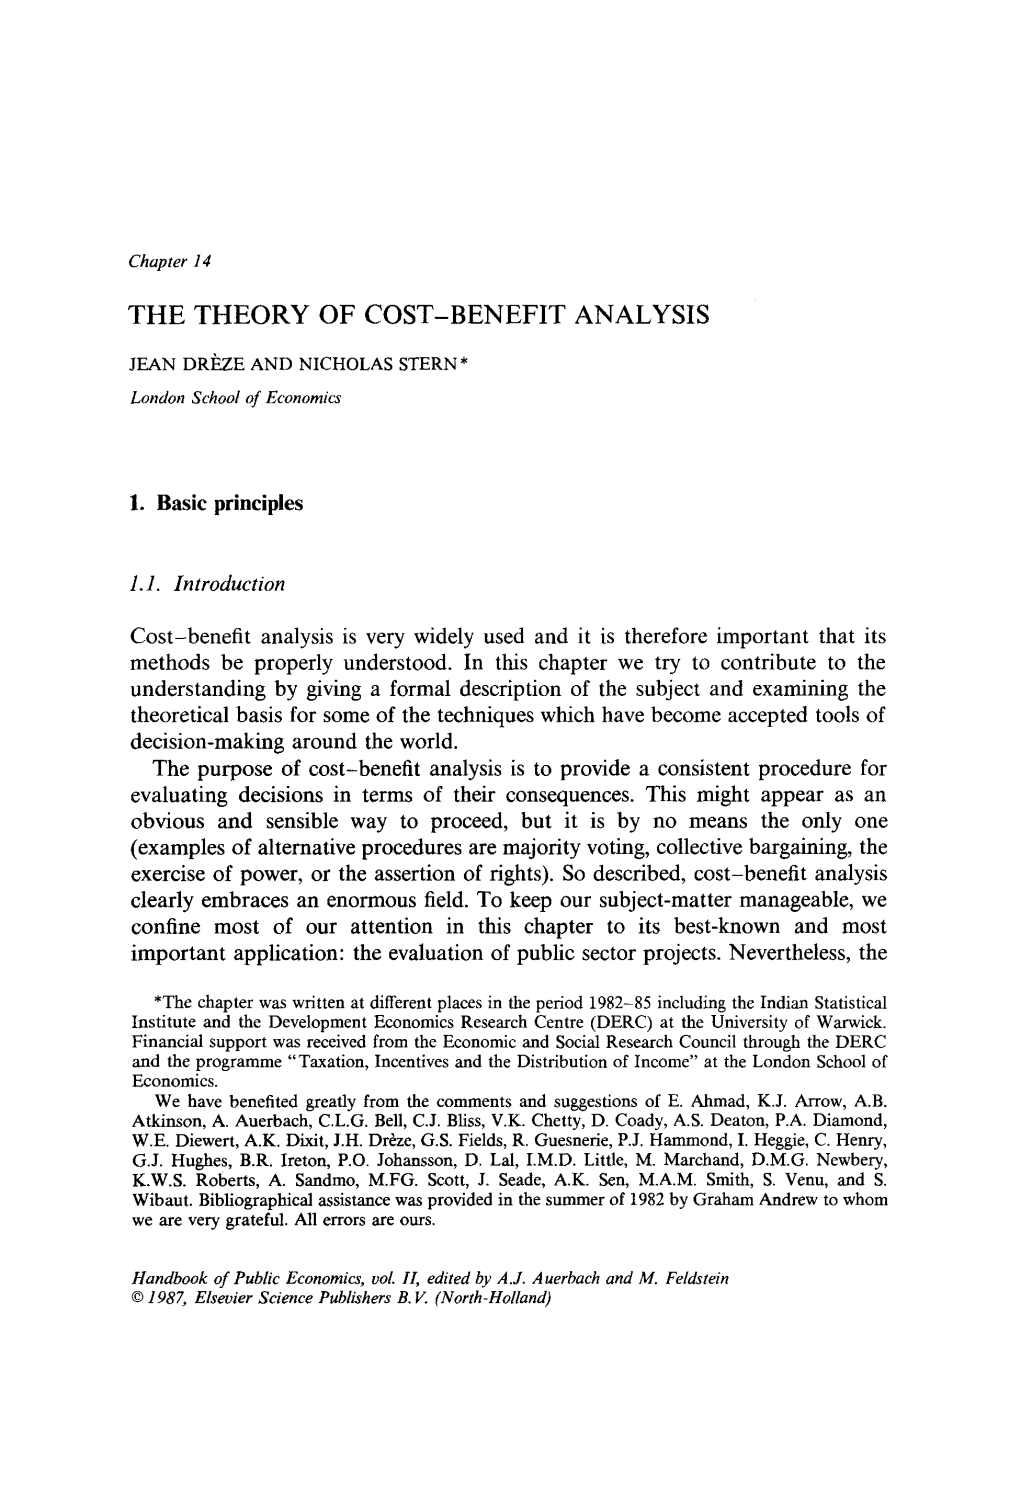 The Theory of Cost-Benefit Analysis